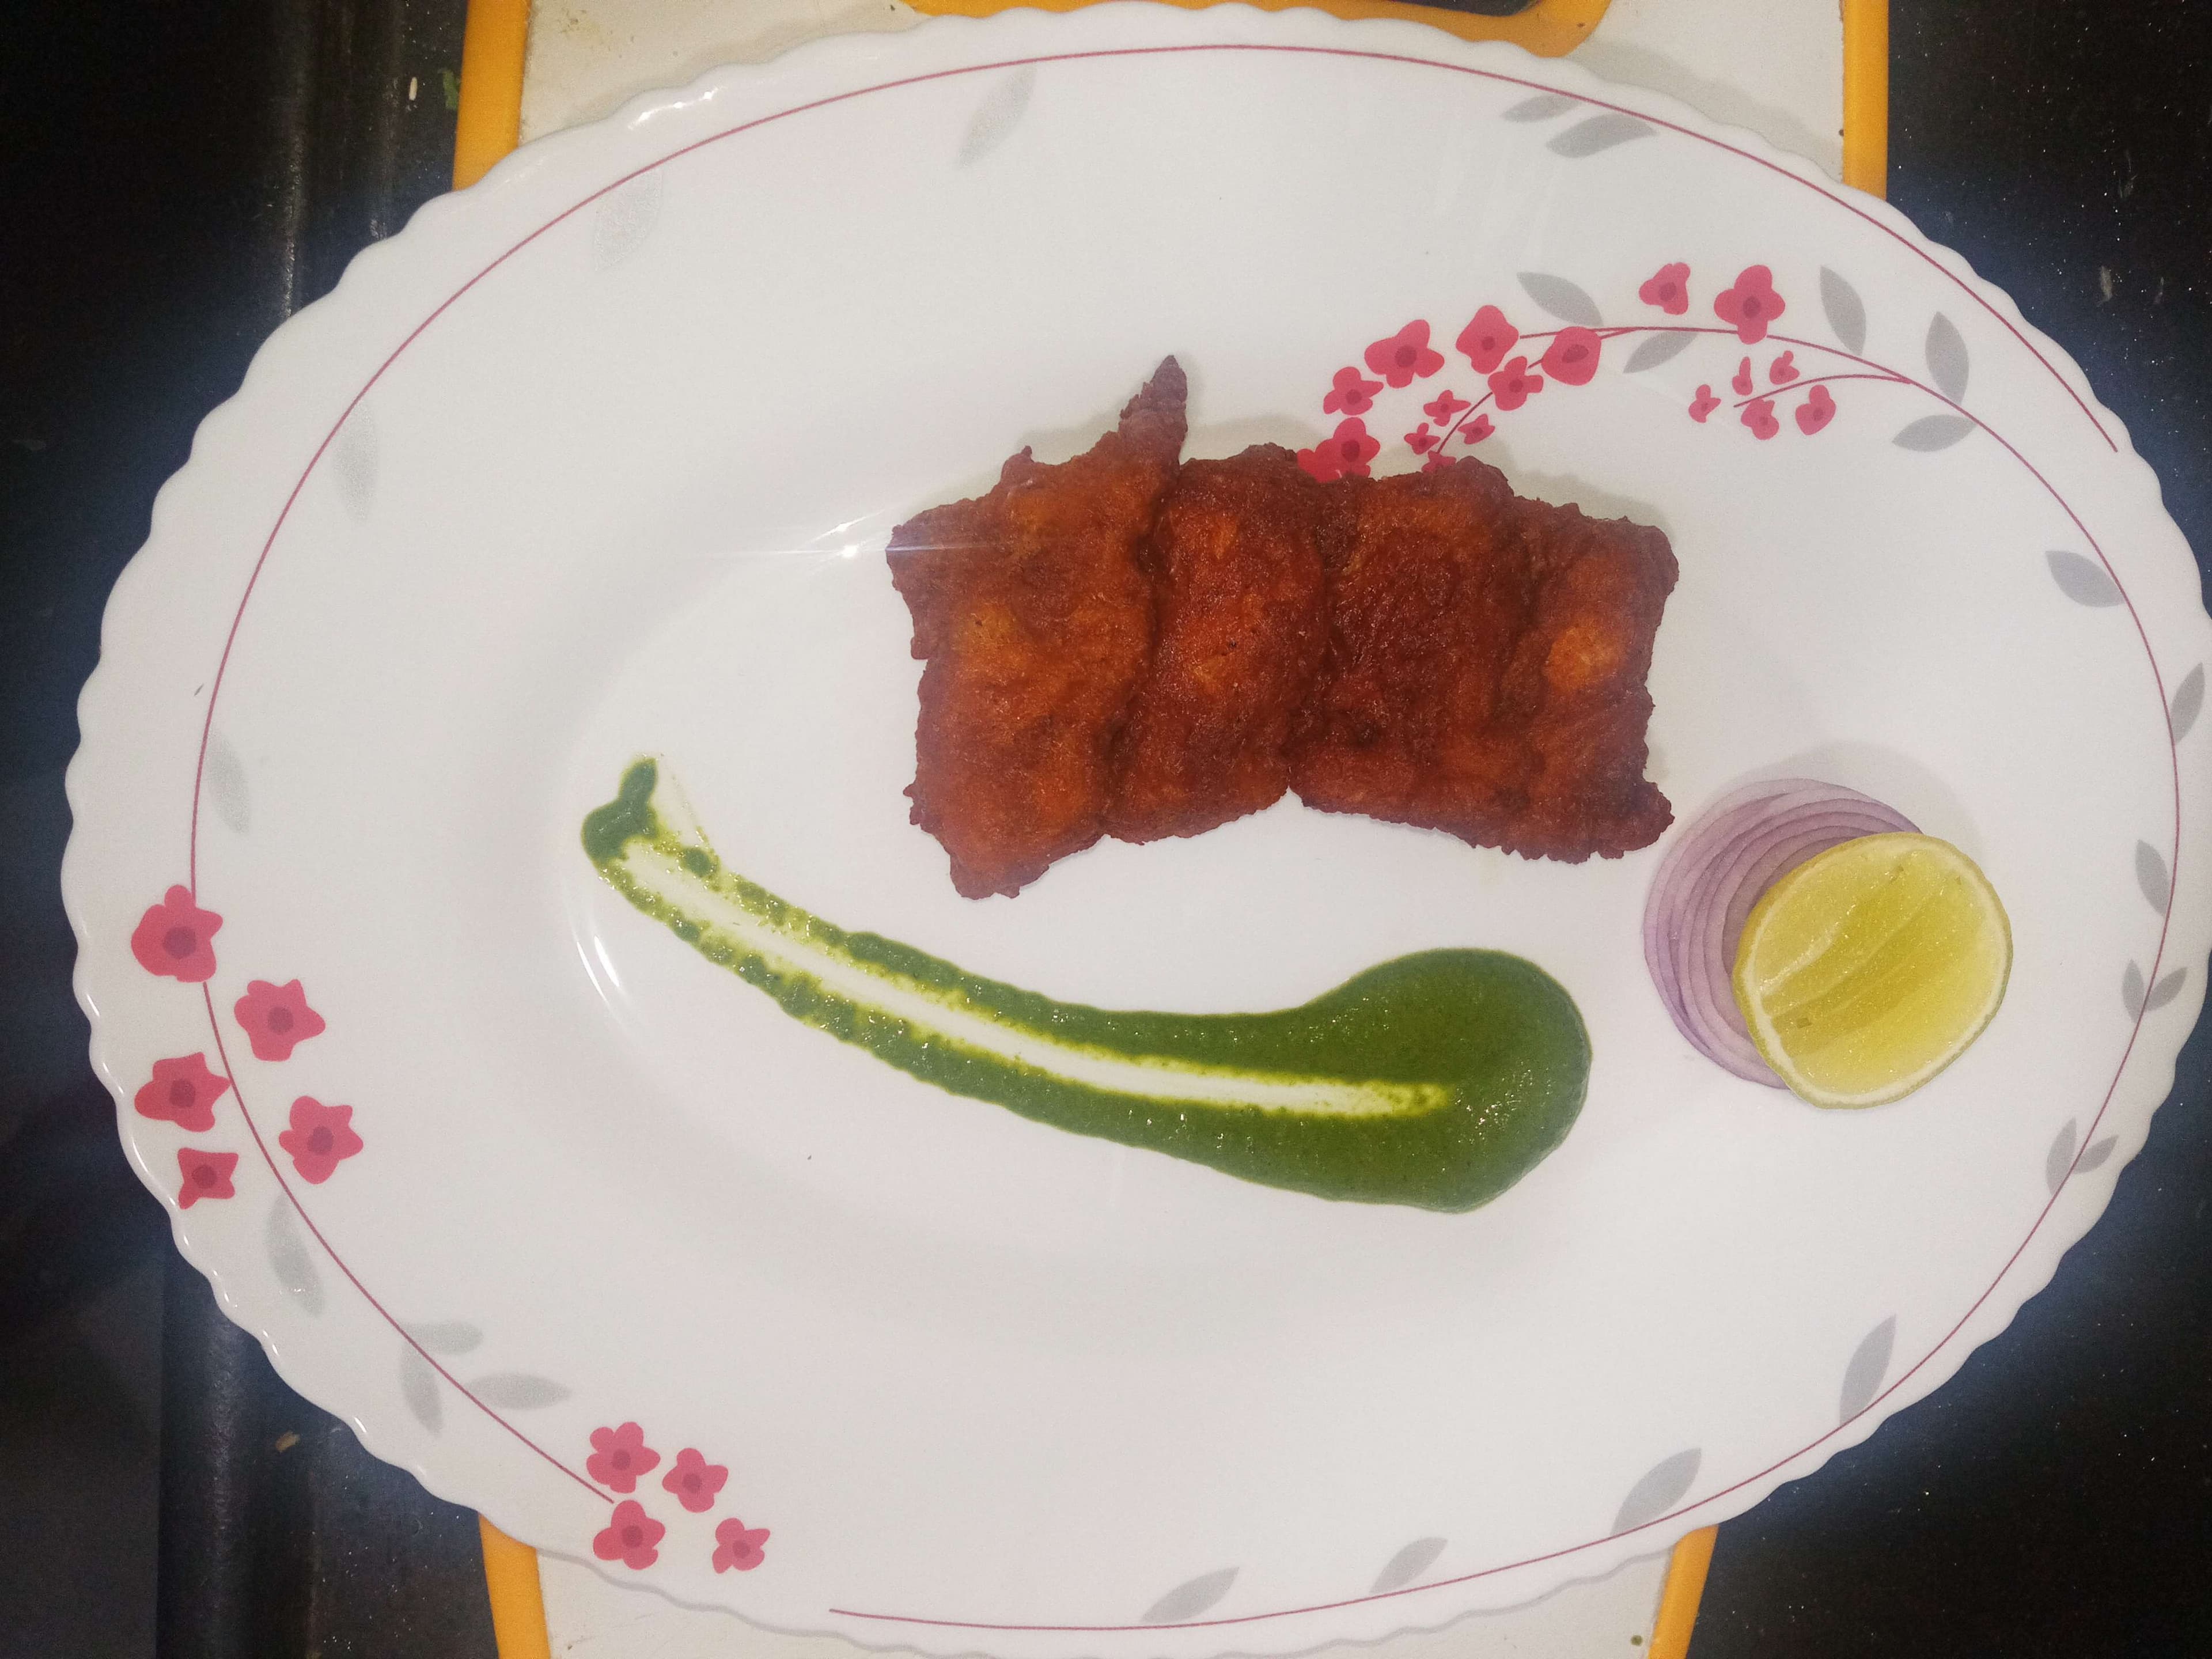 Delicious Amritsari Fish Fry prepared by COOX